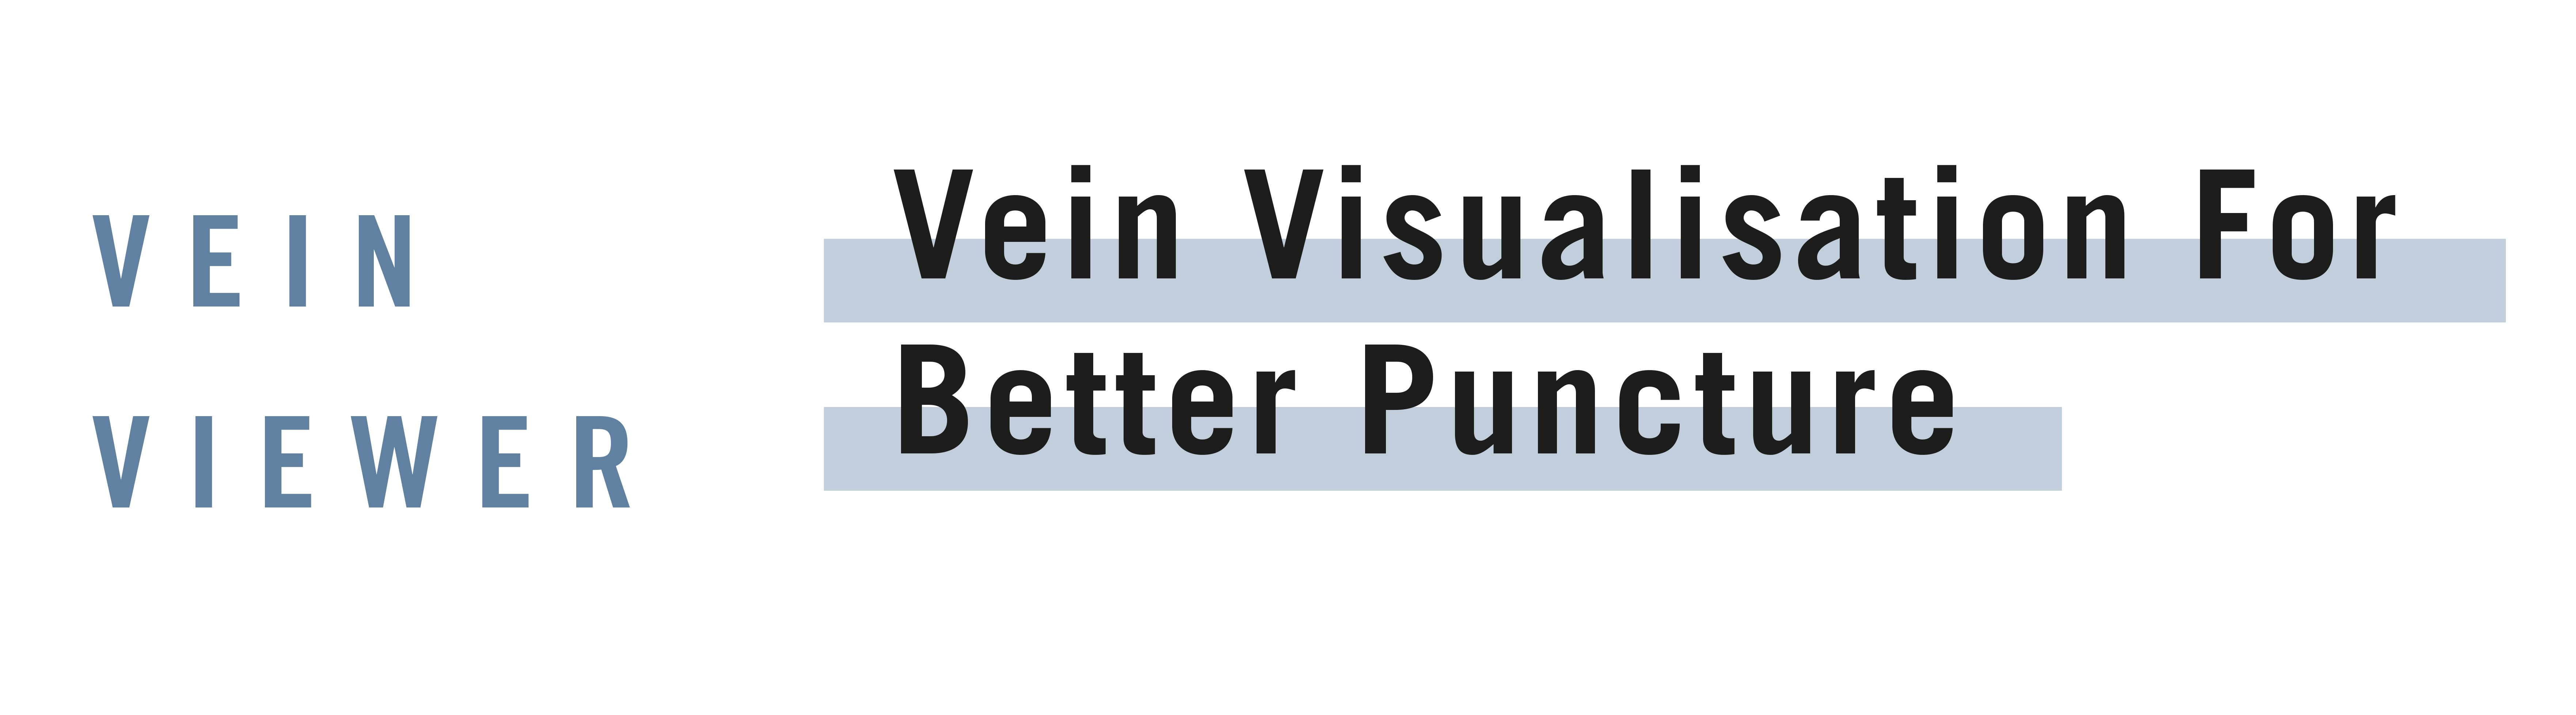 Vein Visualisation For Successful Puncture